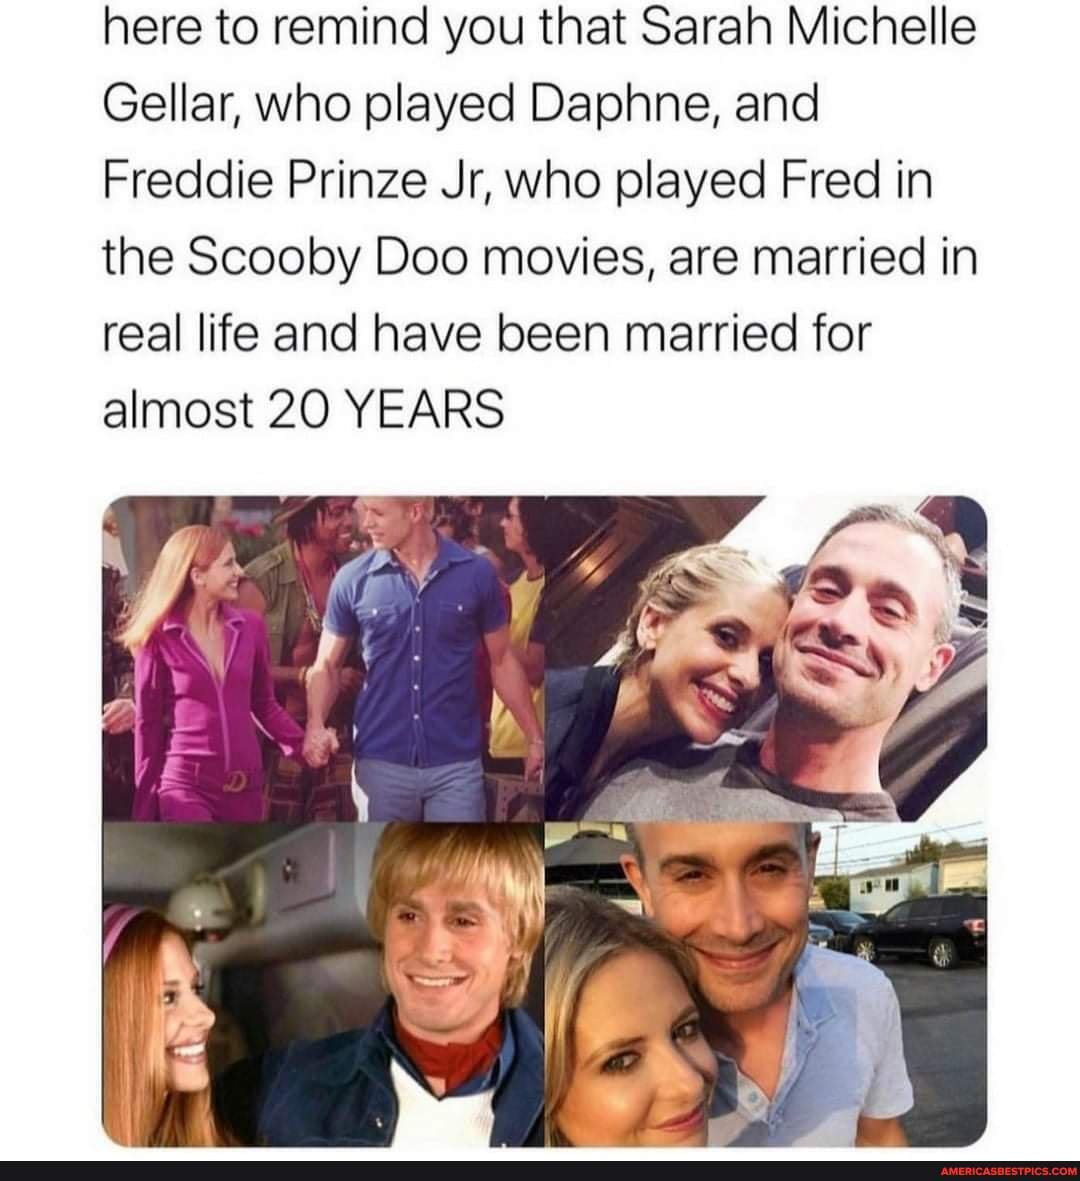 fred and daphne married